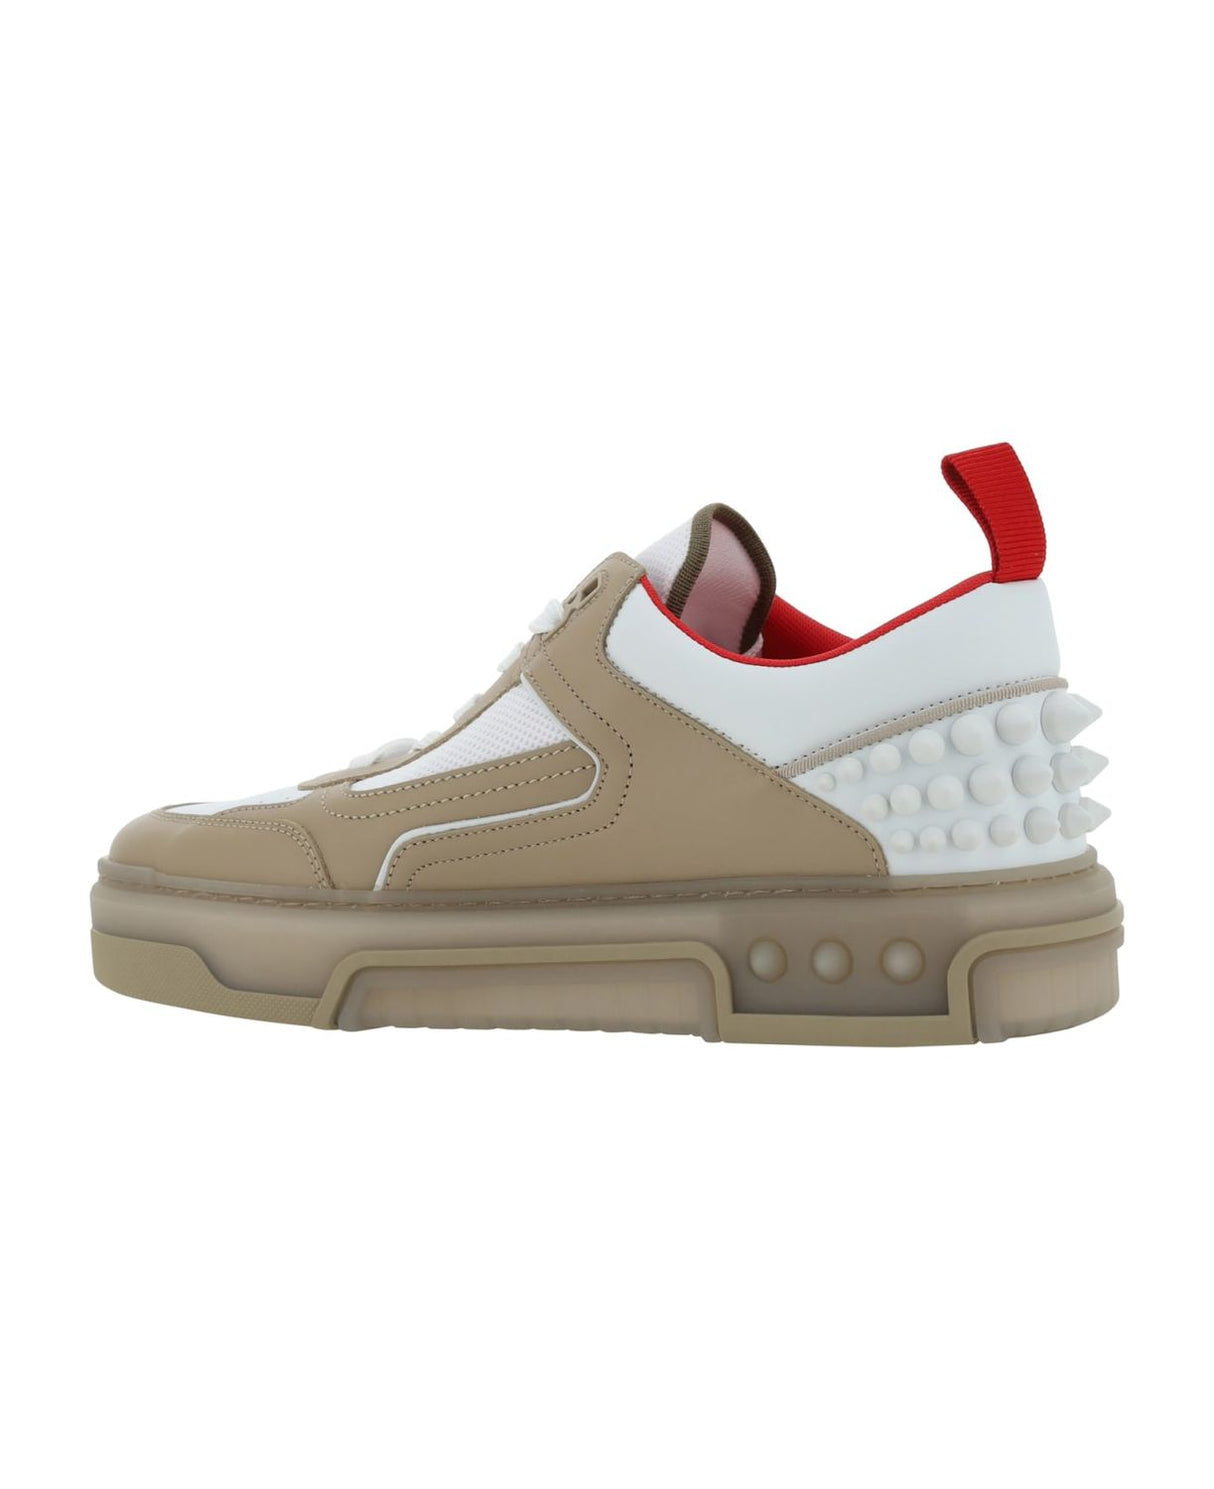 CHRISTIAN LOUBOUTIN Tan Leather Panelled Sneakers for Men